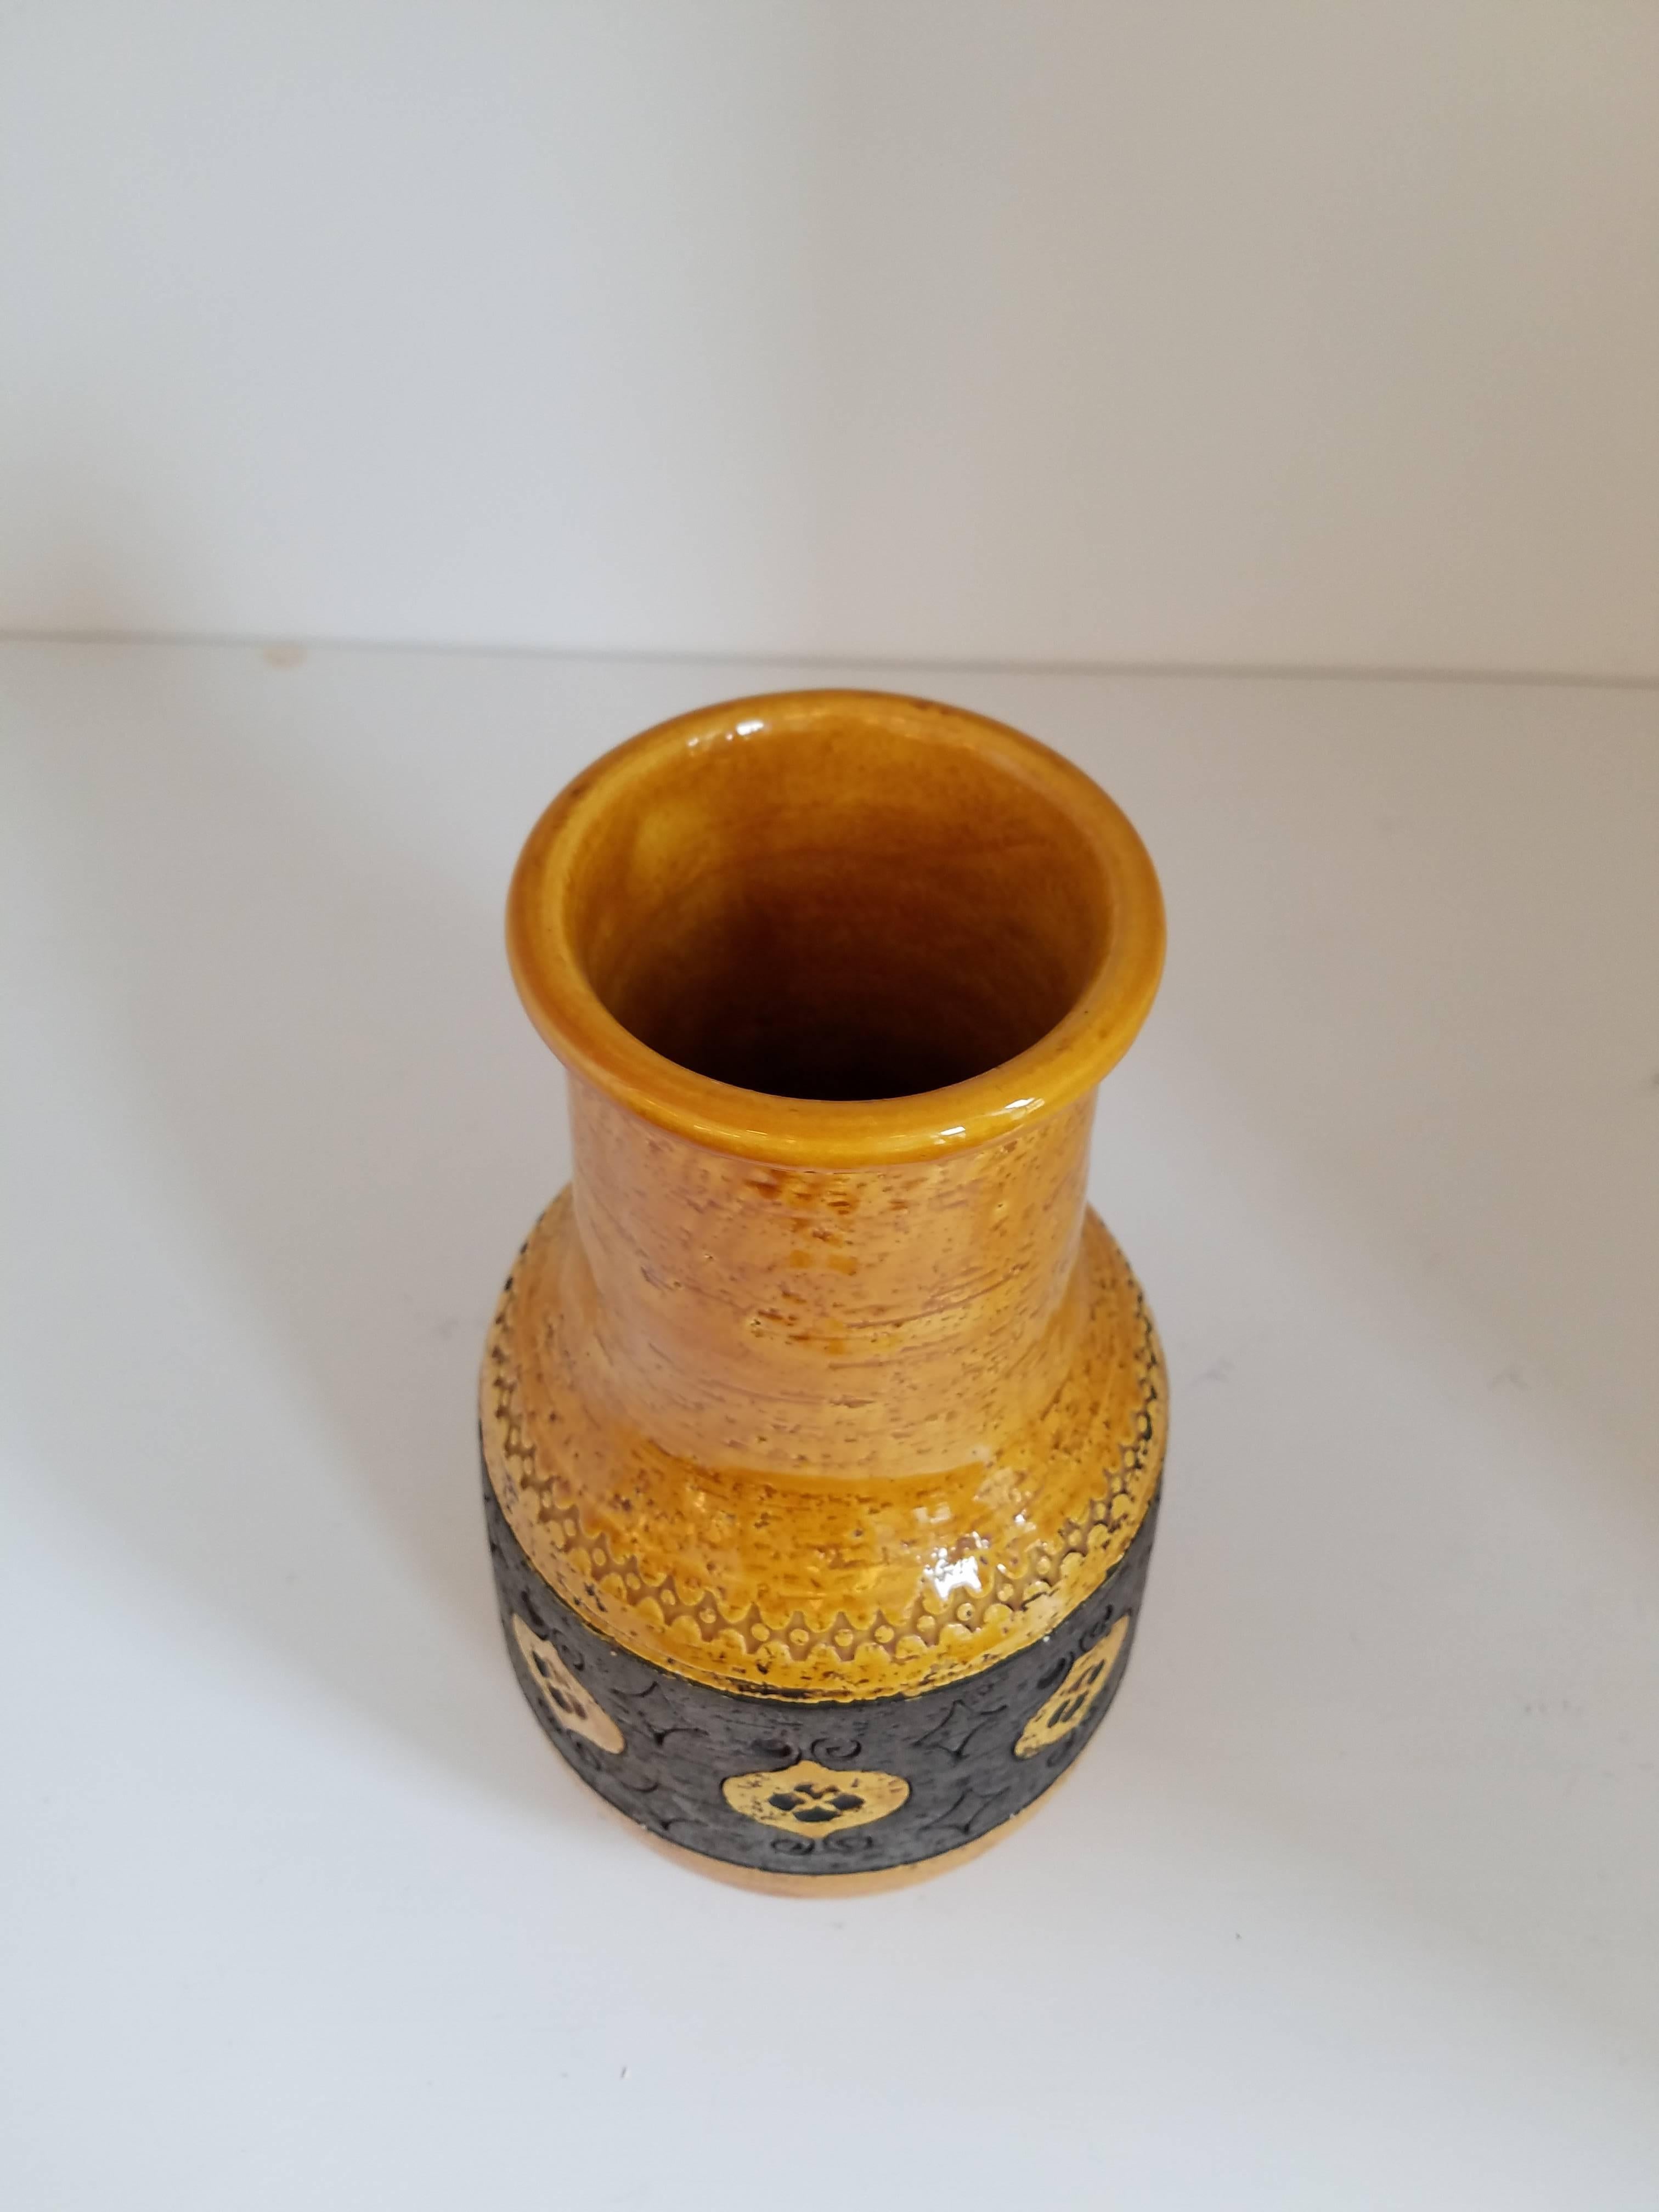 Italian ceramic vase with siena mottled glaze and hand-carved and etched unglazed band around center with geometric designs. Made in Italy, circa 1960

Base diameter - 5.5